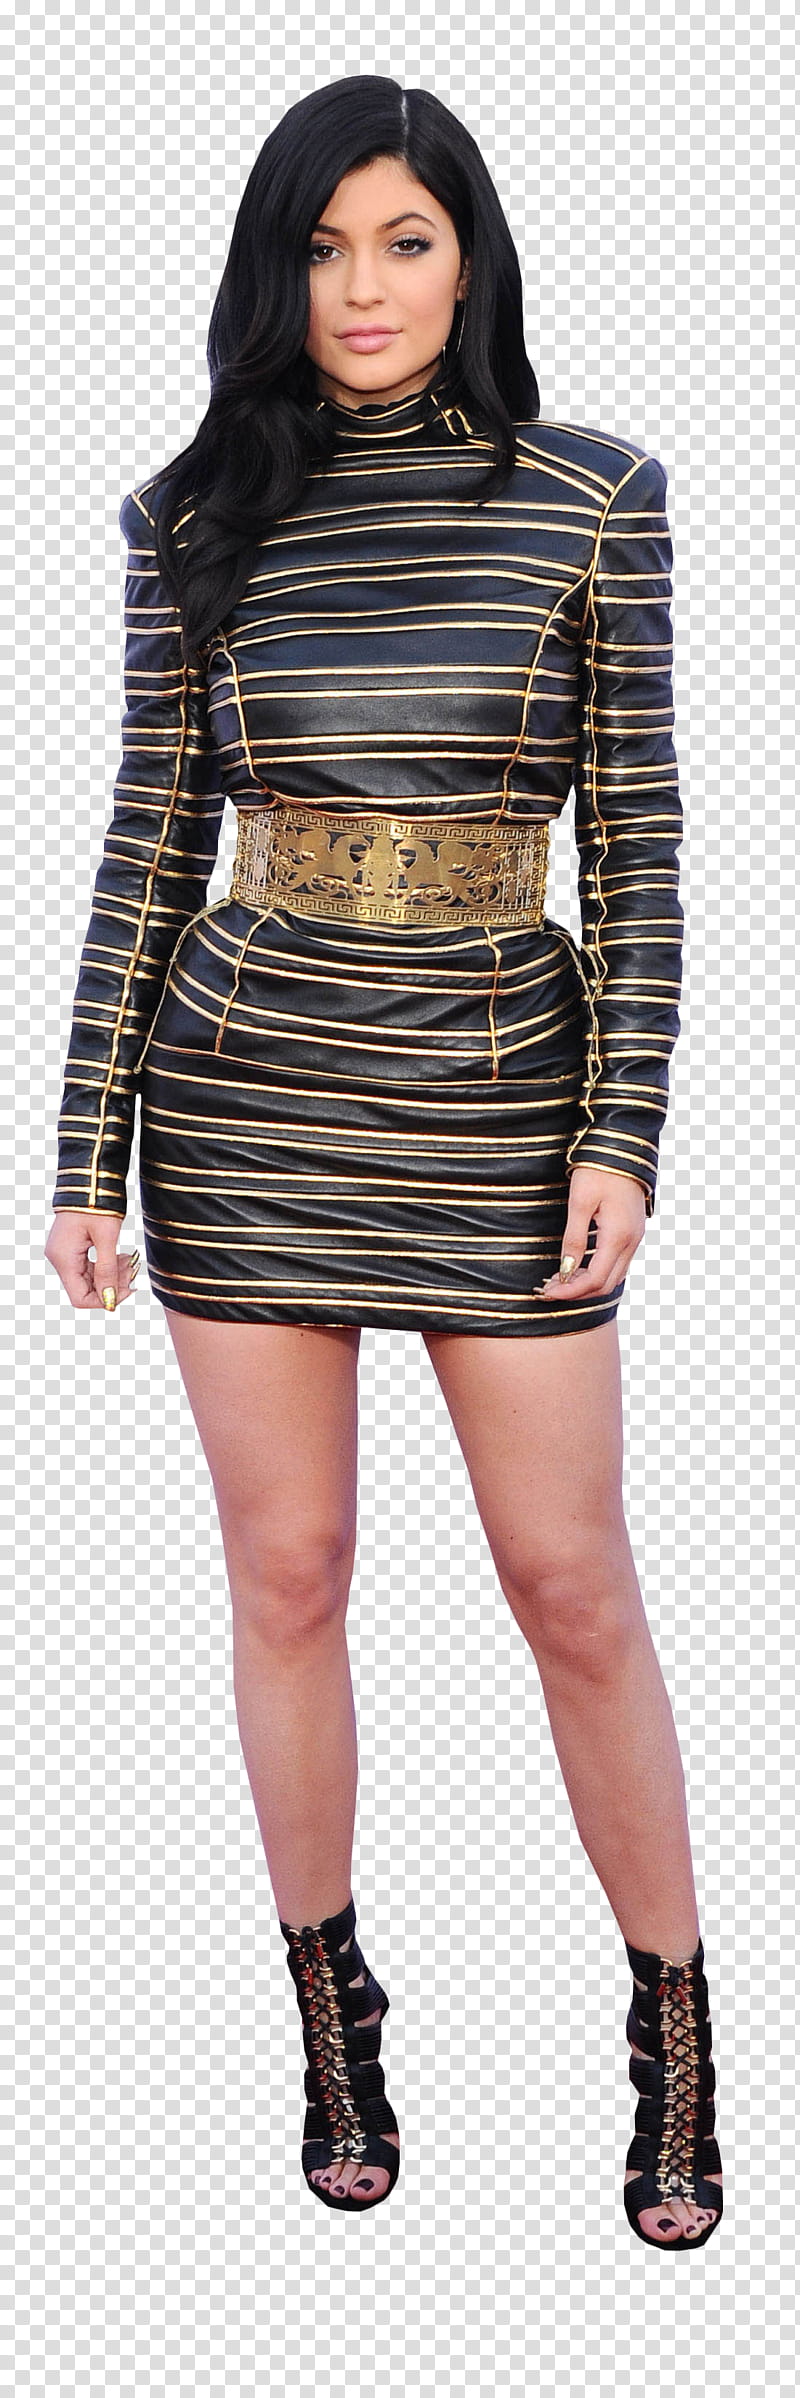 KYLIE JENNER, transparent background PNG clipart | HiClipart